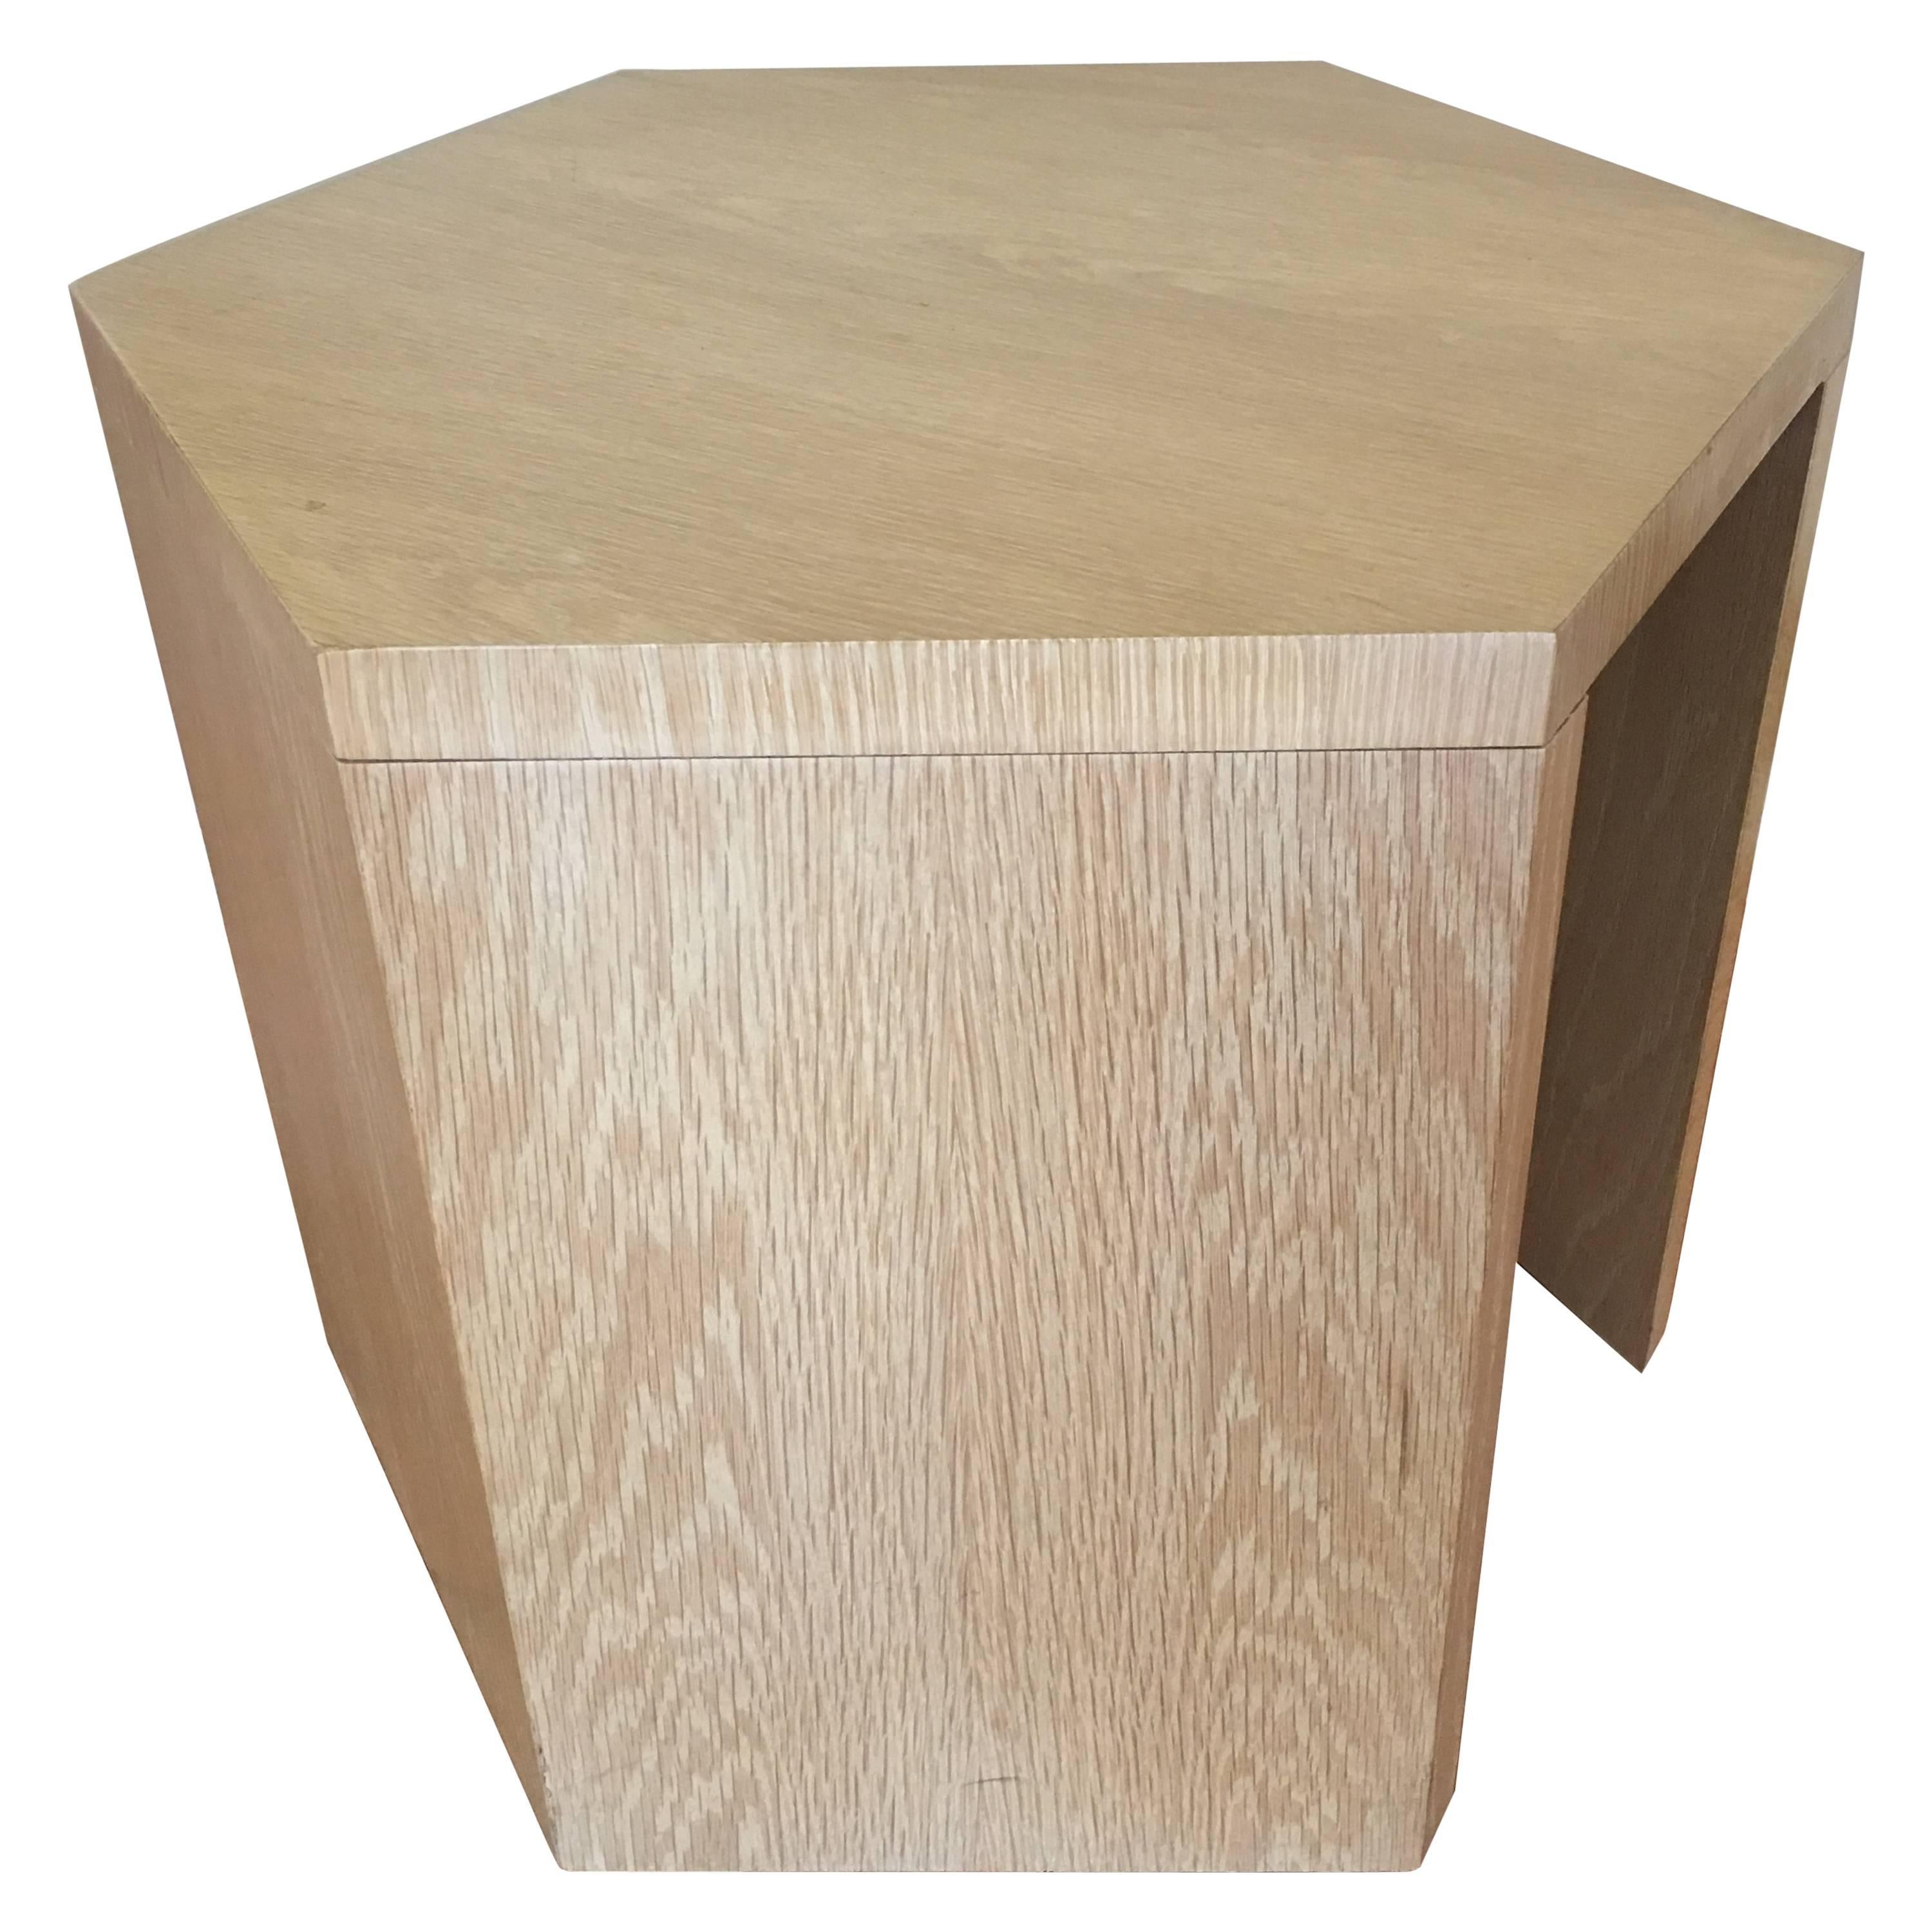 Geometric Occasional Table by Jay Spectre